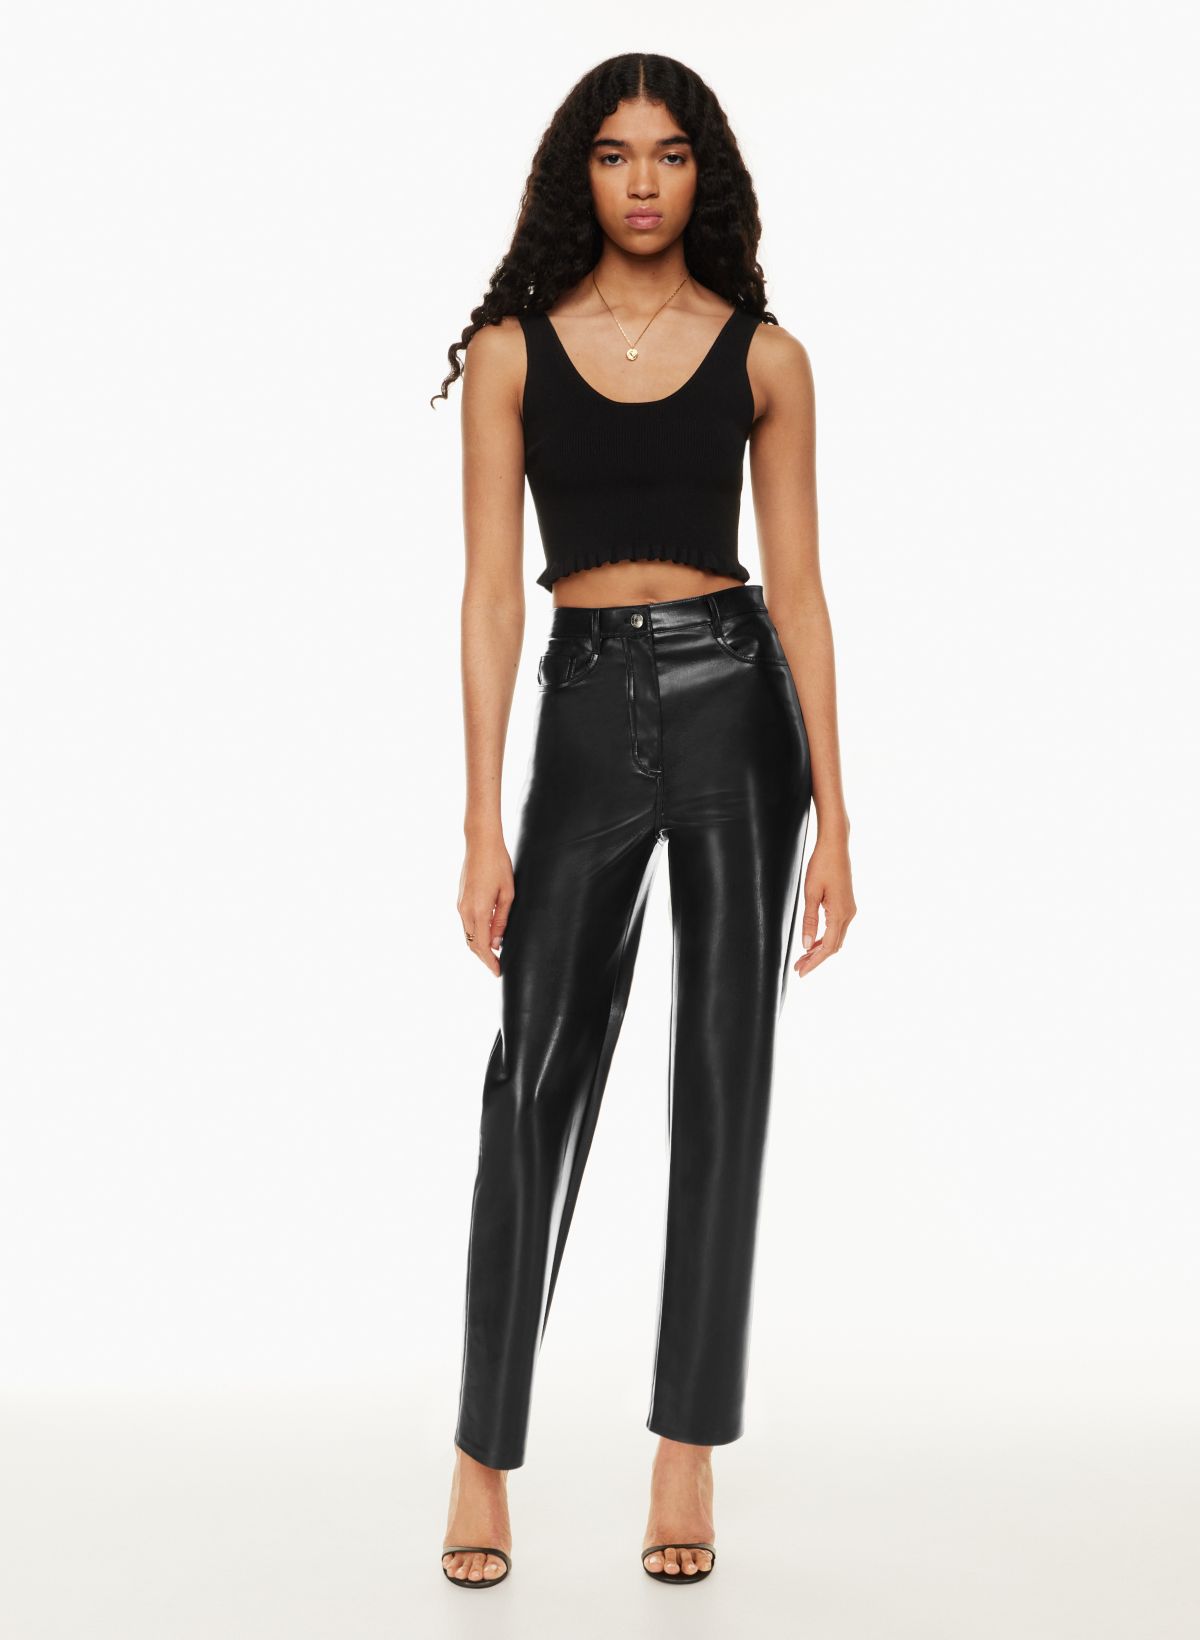 Leather pants Nora black with elastic waistband and zipper on the